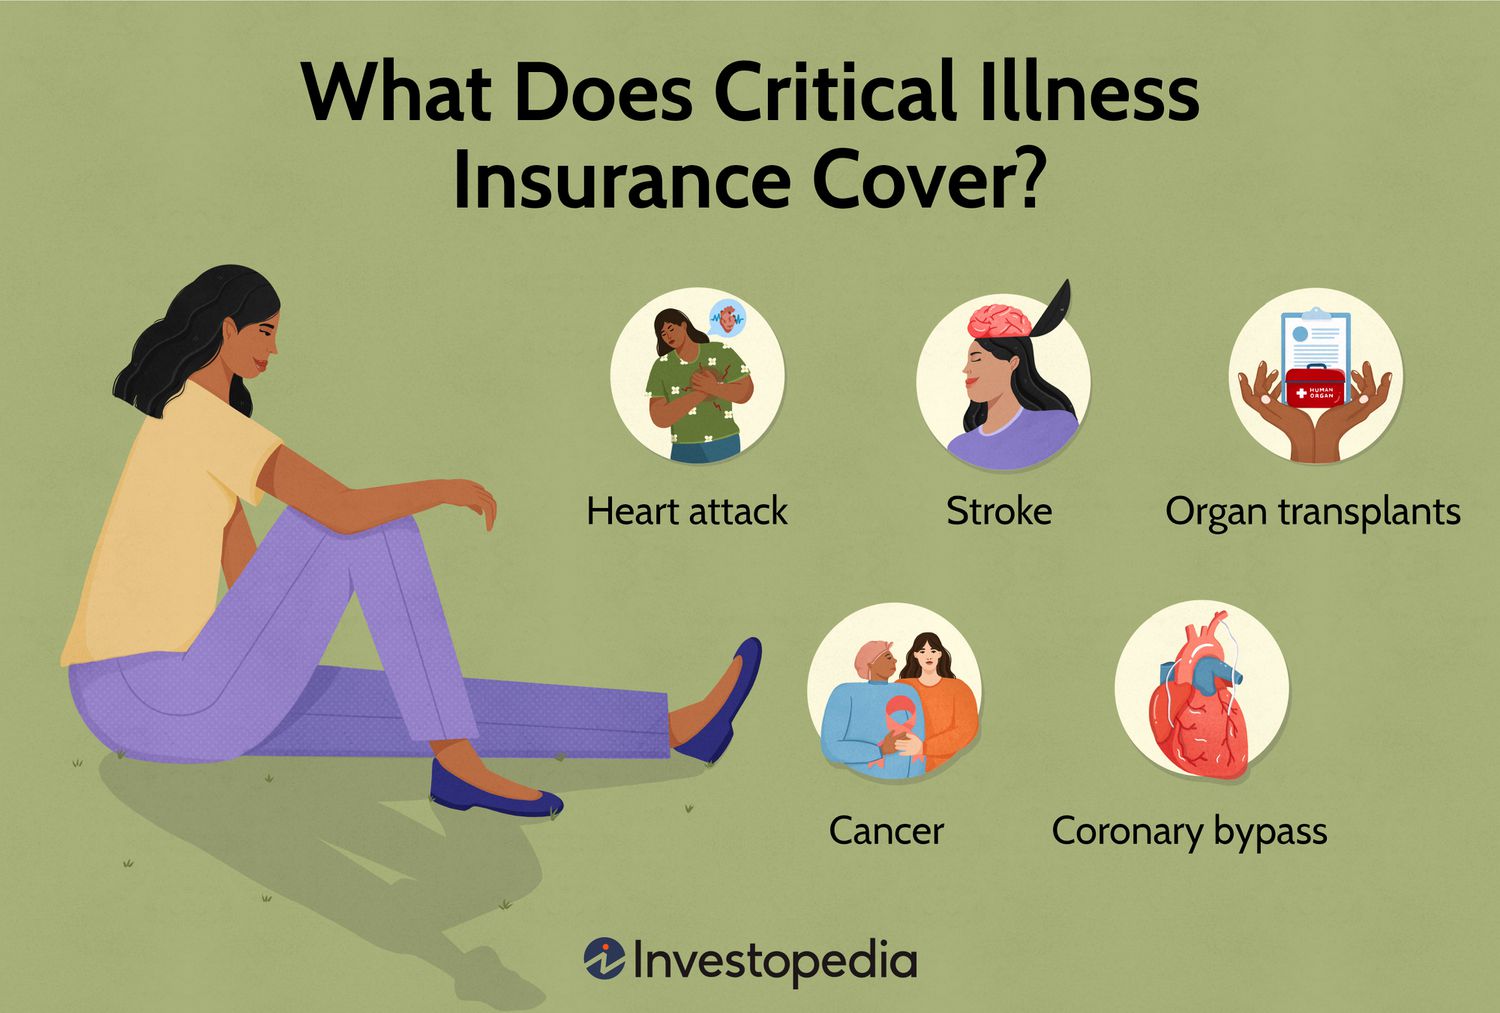 How does critical illness insurance differ from health insurance?